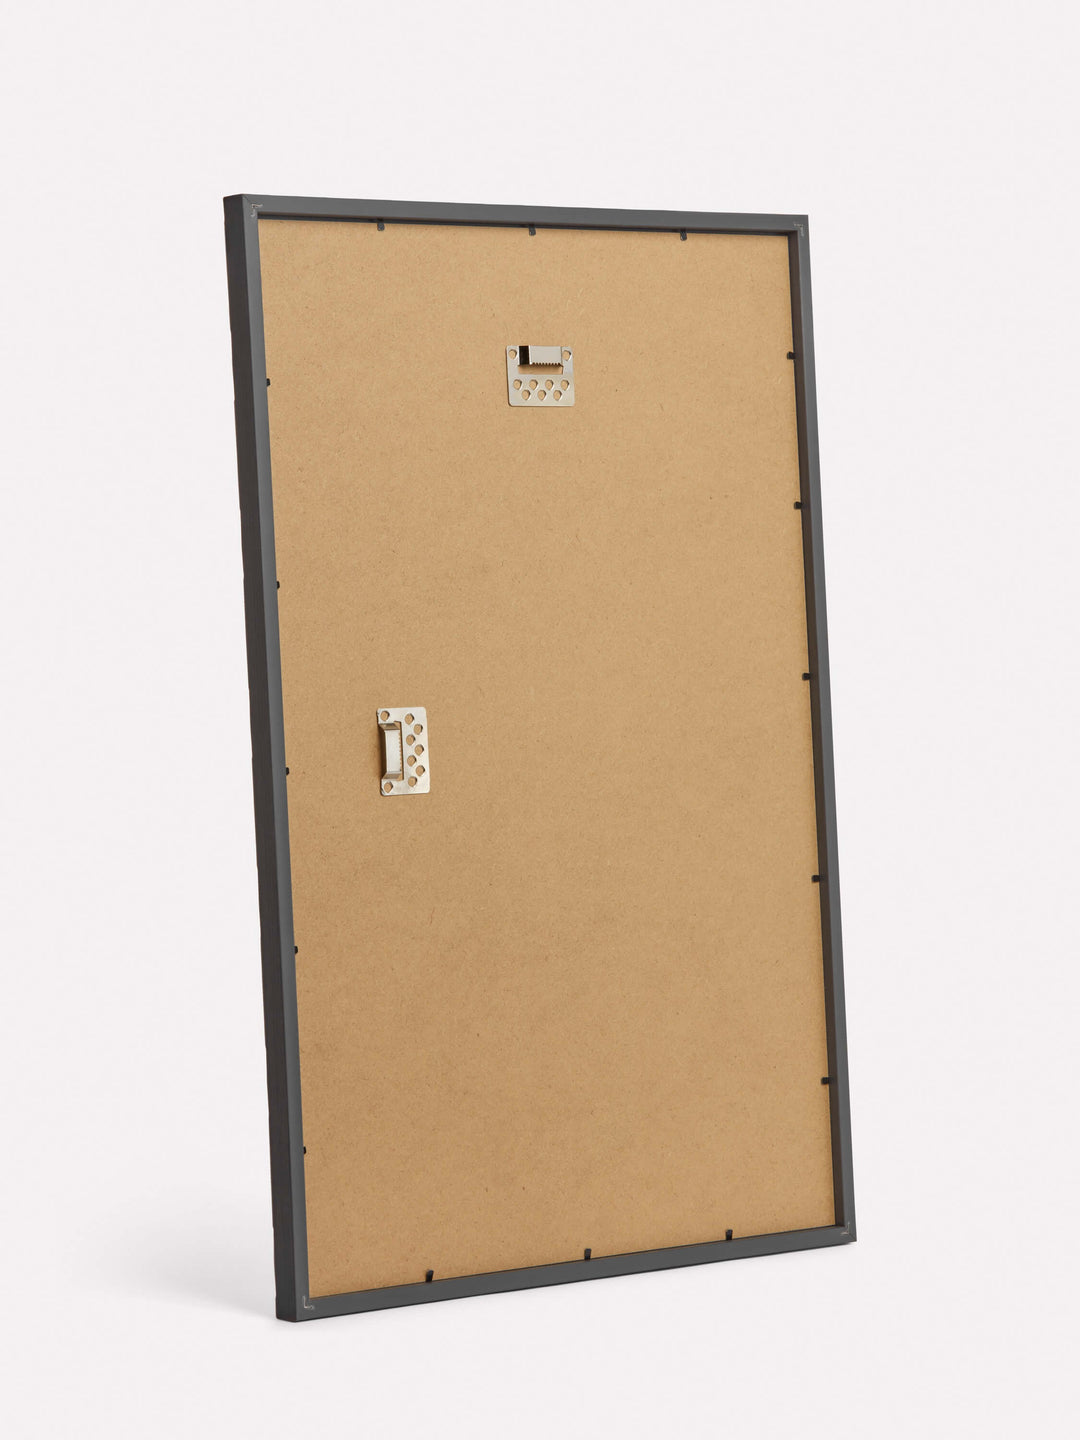 16x24-inch Bamboo Frame, Black - Back view